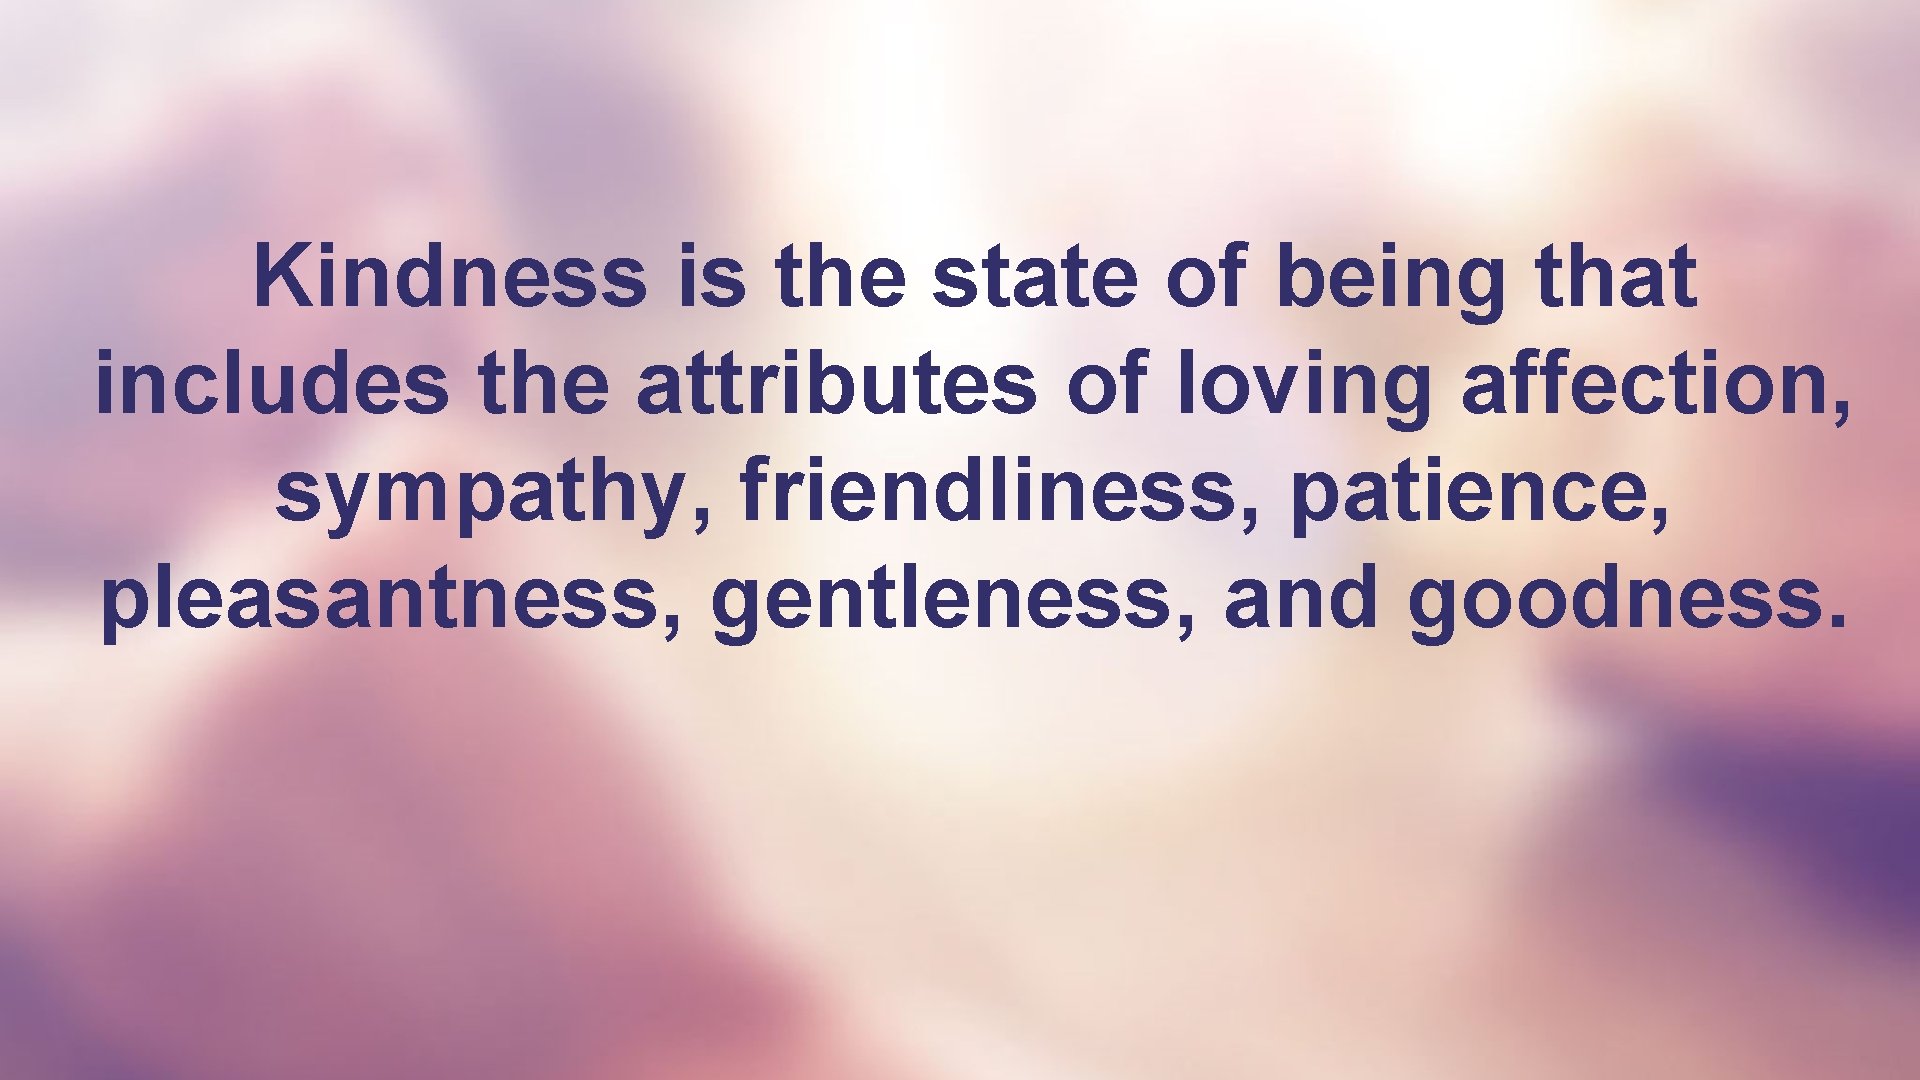 Kindness is the state of being that includes the attributes of loving affection, sympathy,